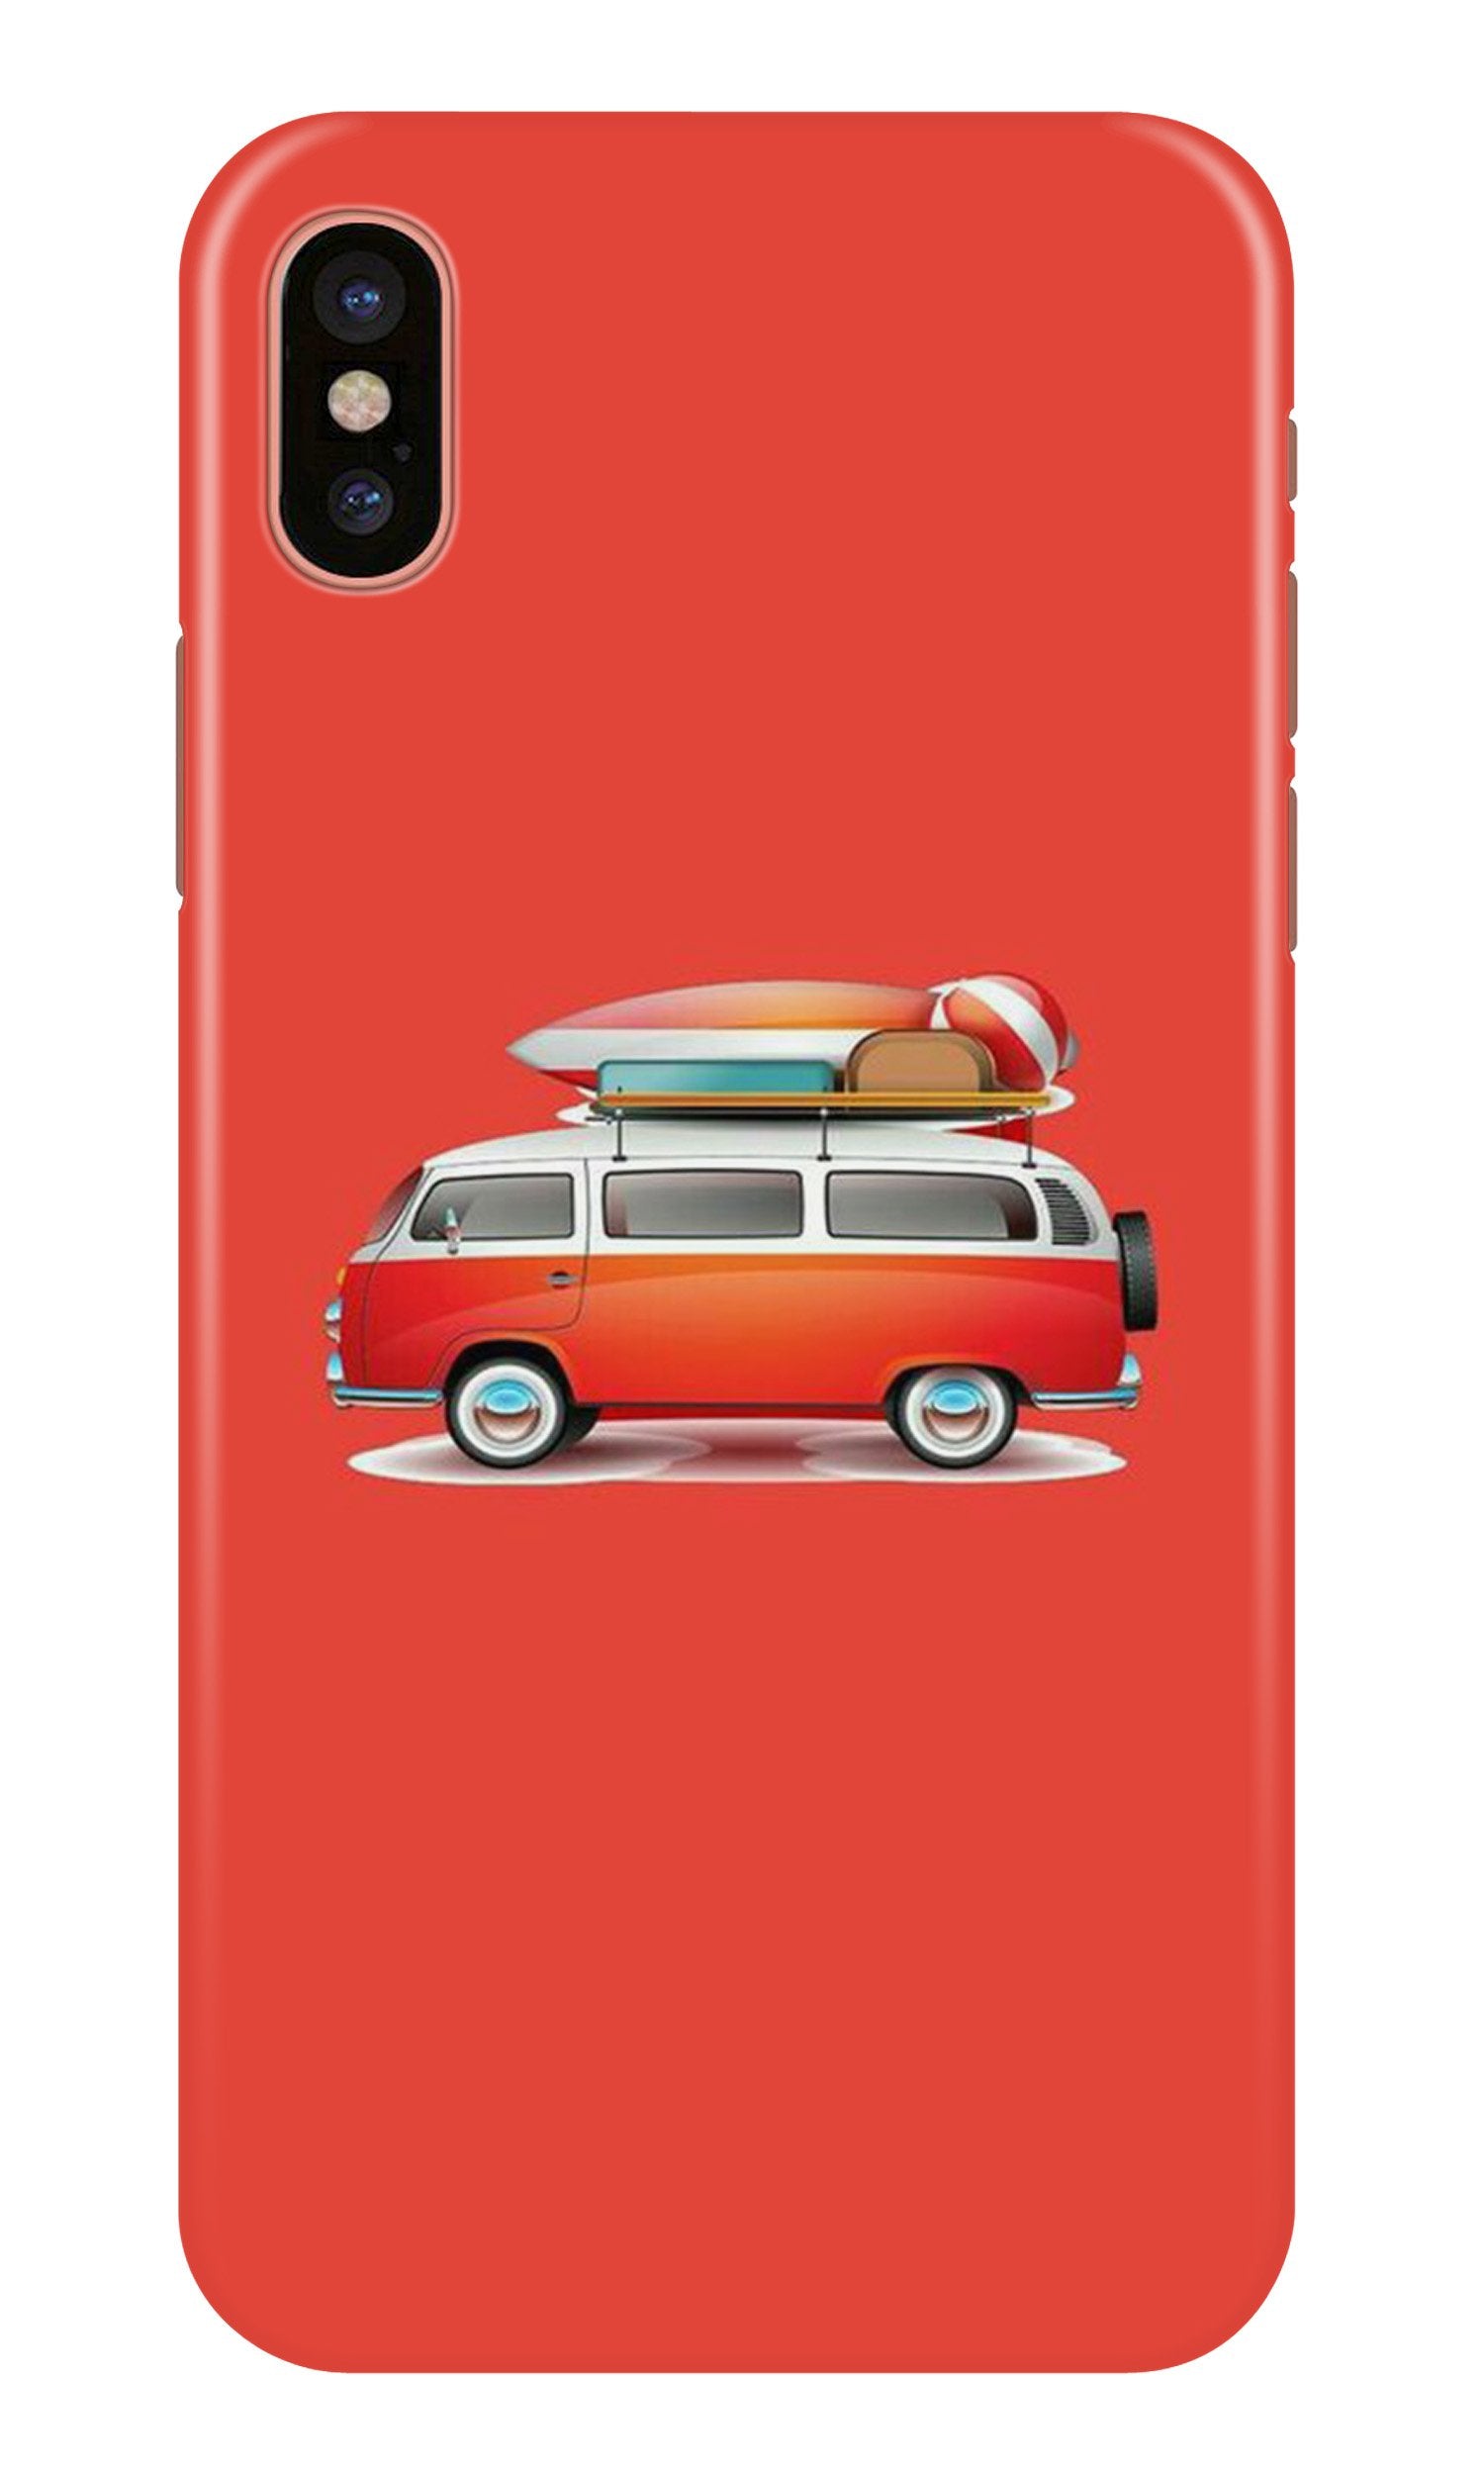 Travel Bus Case for iPhone Xr (Design No. 258)